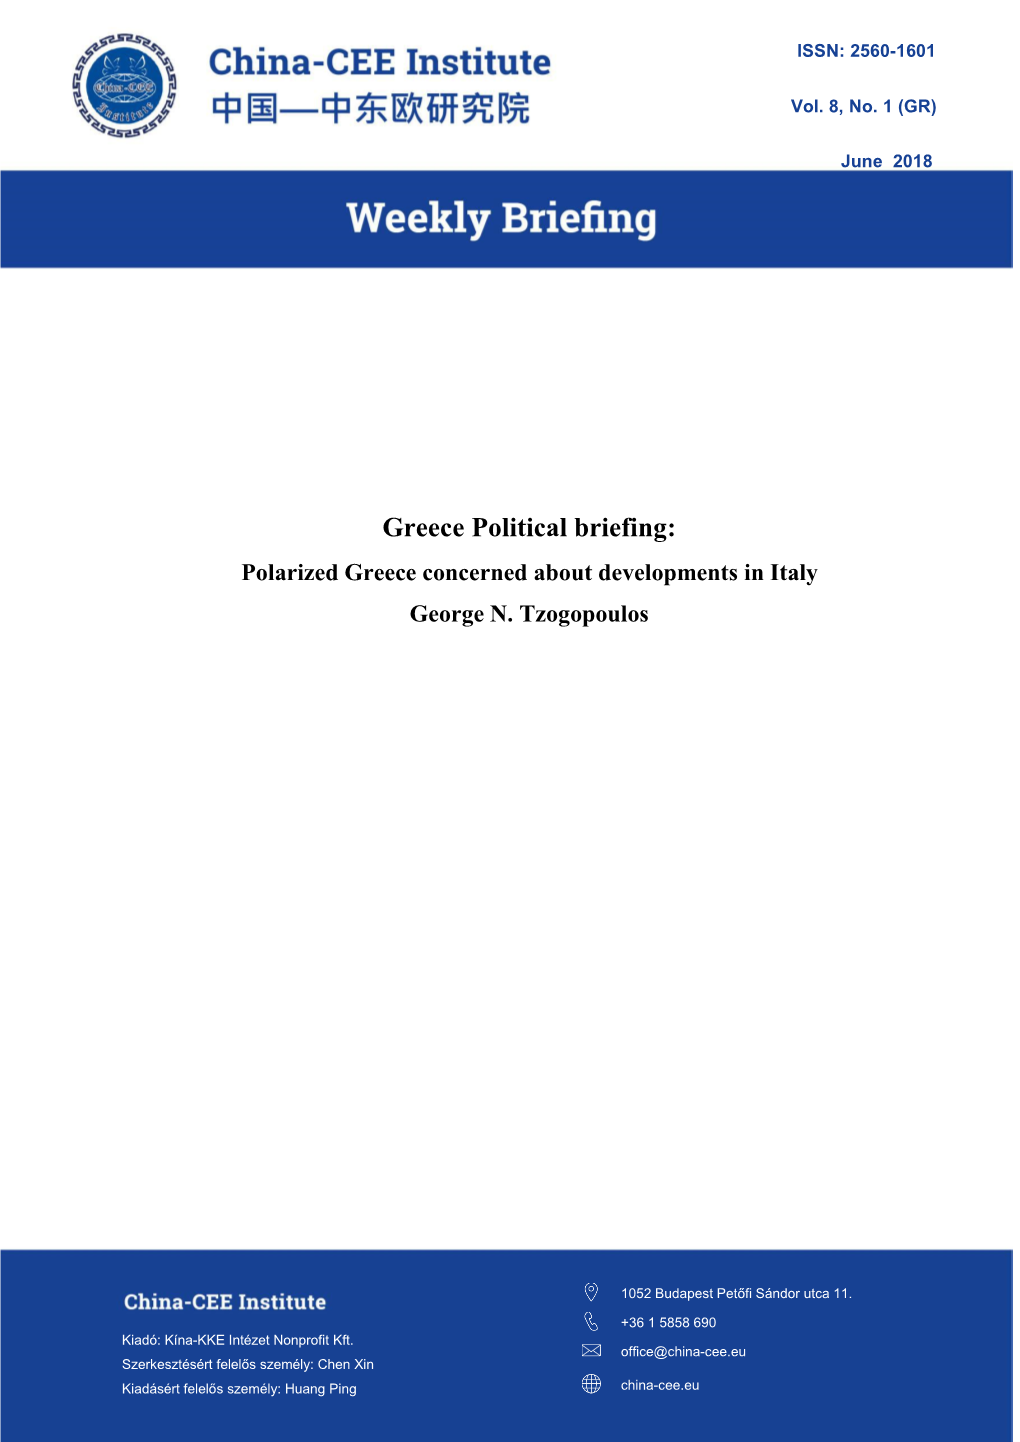 Greece Political Briefing: Polarized Greece Concerned About Developments in Italy George N